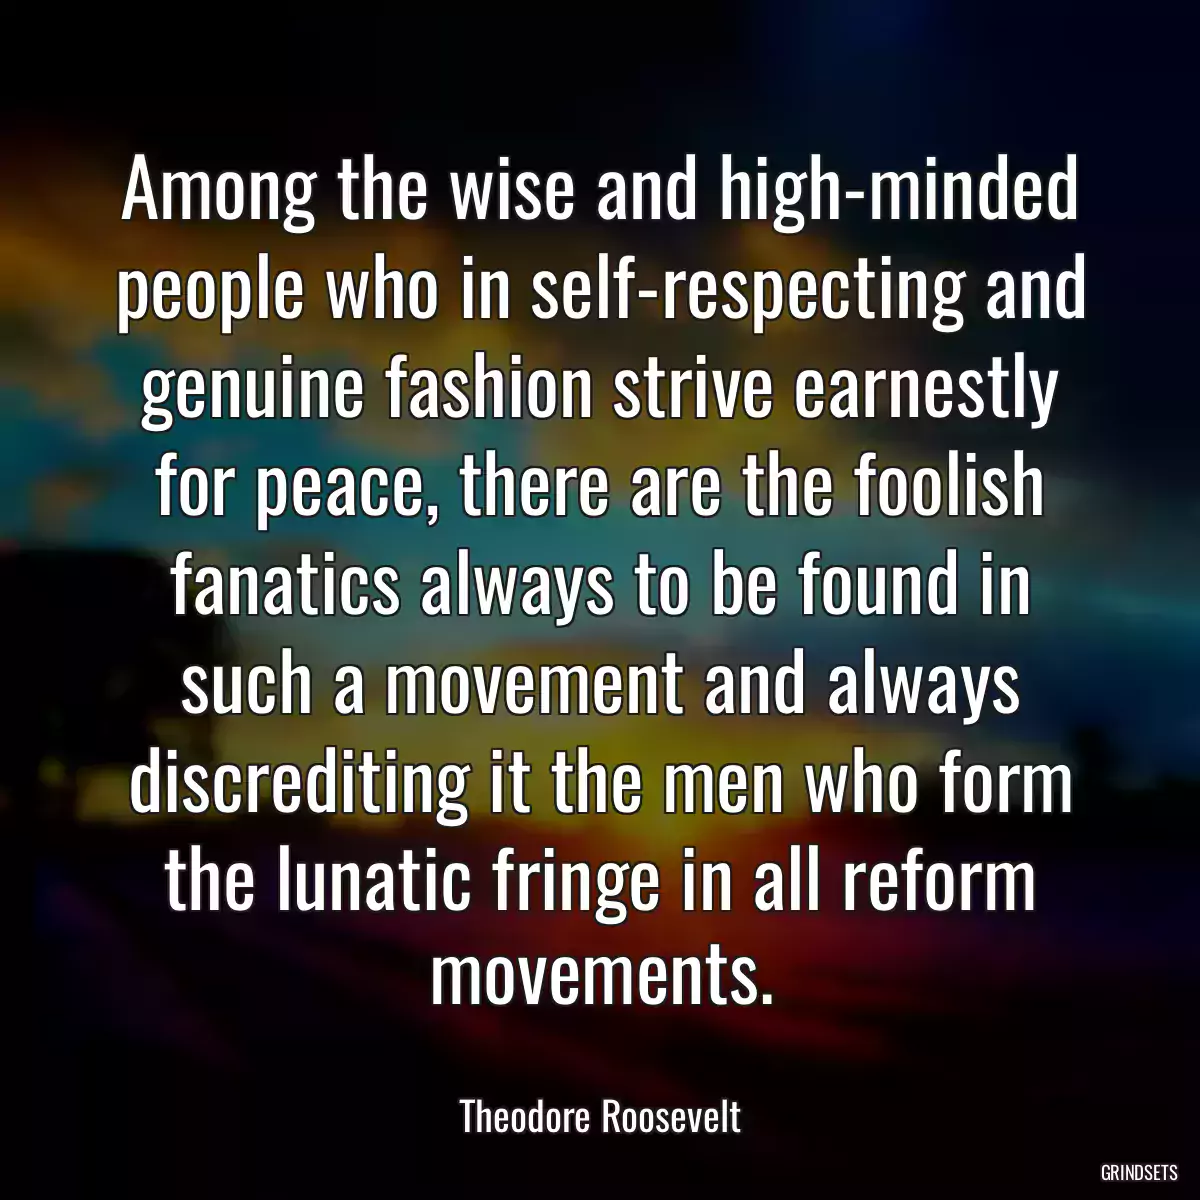 Among the wise and high-minded people who in self-respecting and genuine fashion strive earnestly for peace, there are the foolish fanatics always to be found in such a movement and always discrediting it the men who form the lunatic fringe in all reform movements.